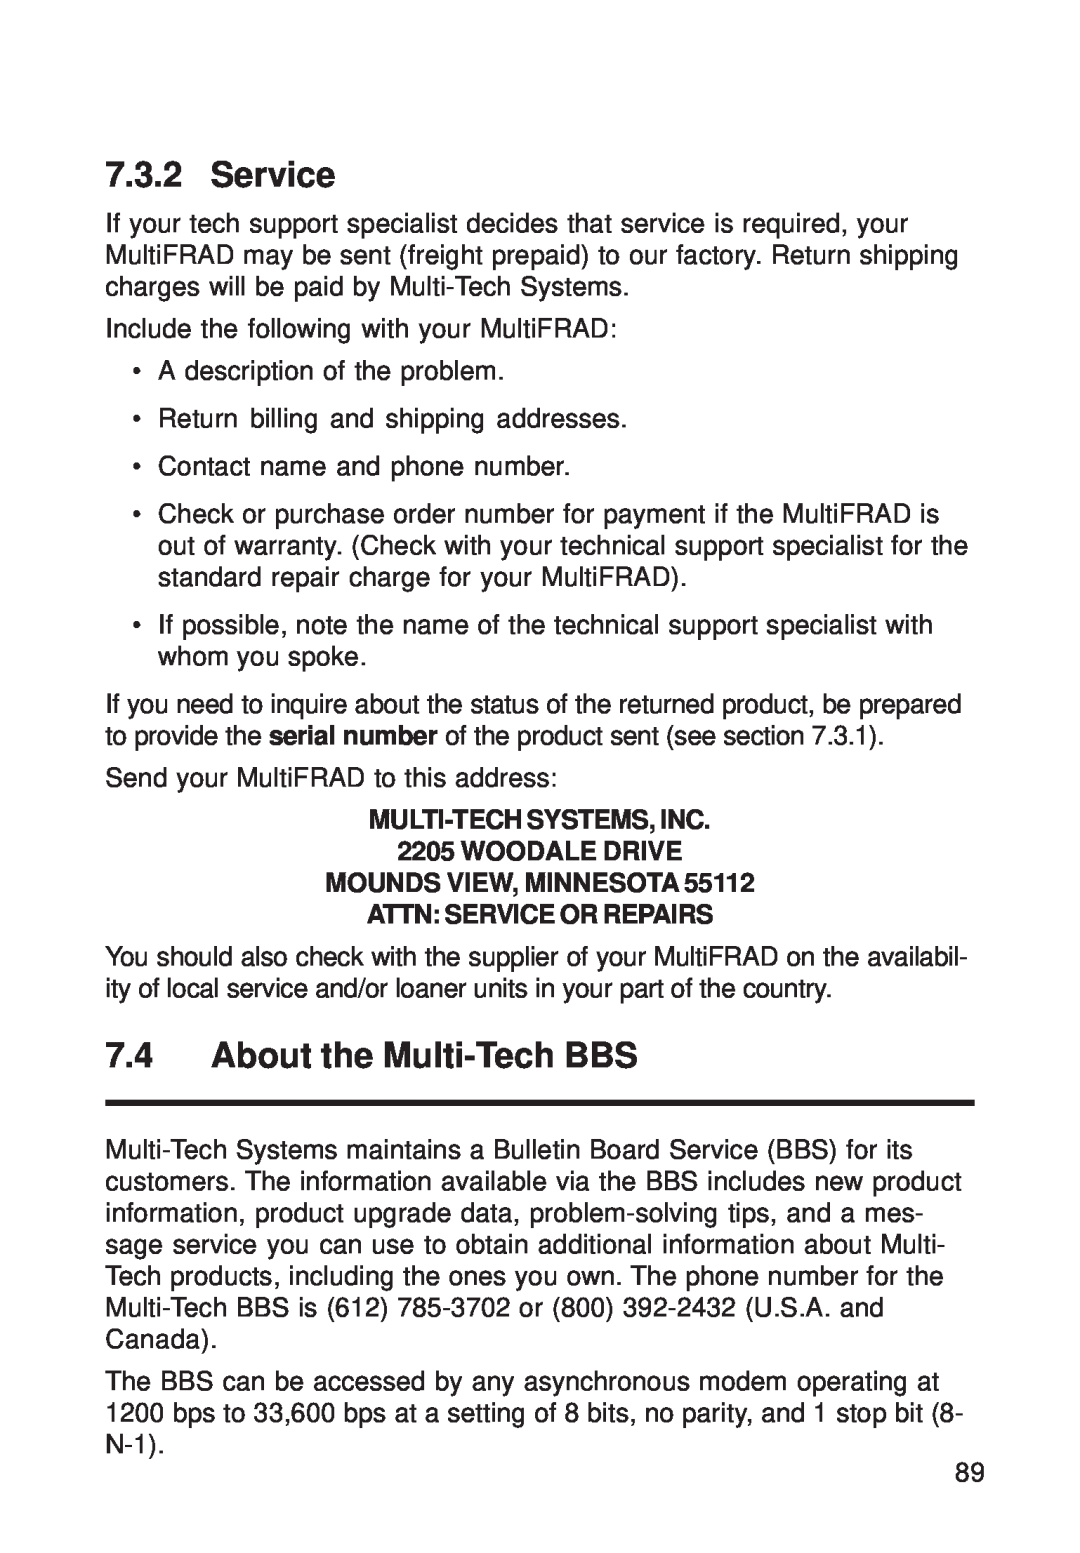 Multi-Tech Systems FR111 owner manual About the Multi-Tech BBS, Attn Service Or Repairs 